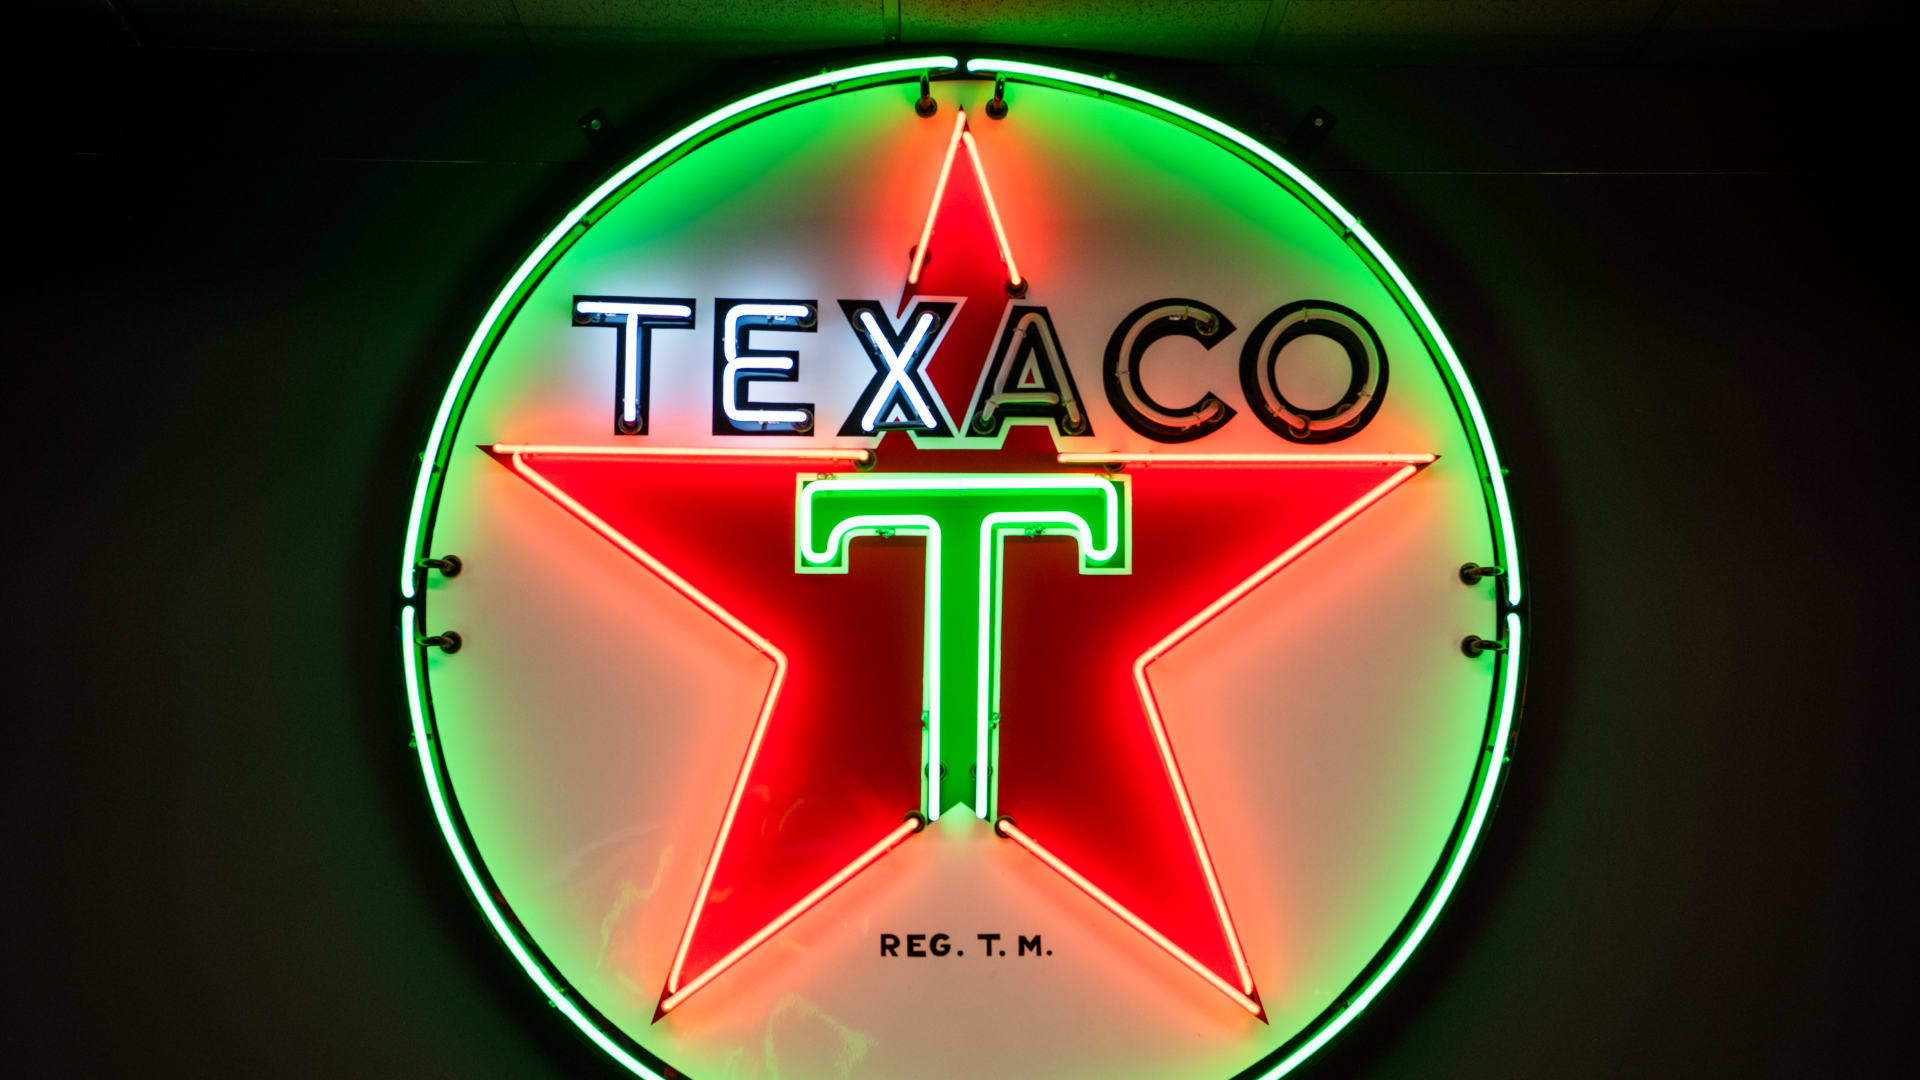 1957 Texaco Single-Sided Animated Porcelain Neon Sign at The World’s ...